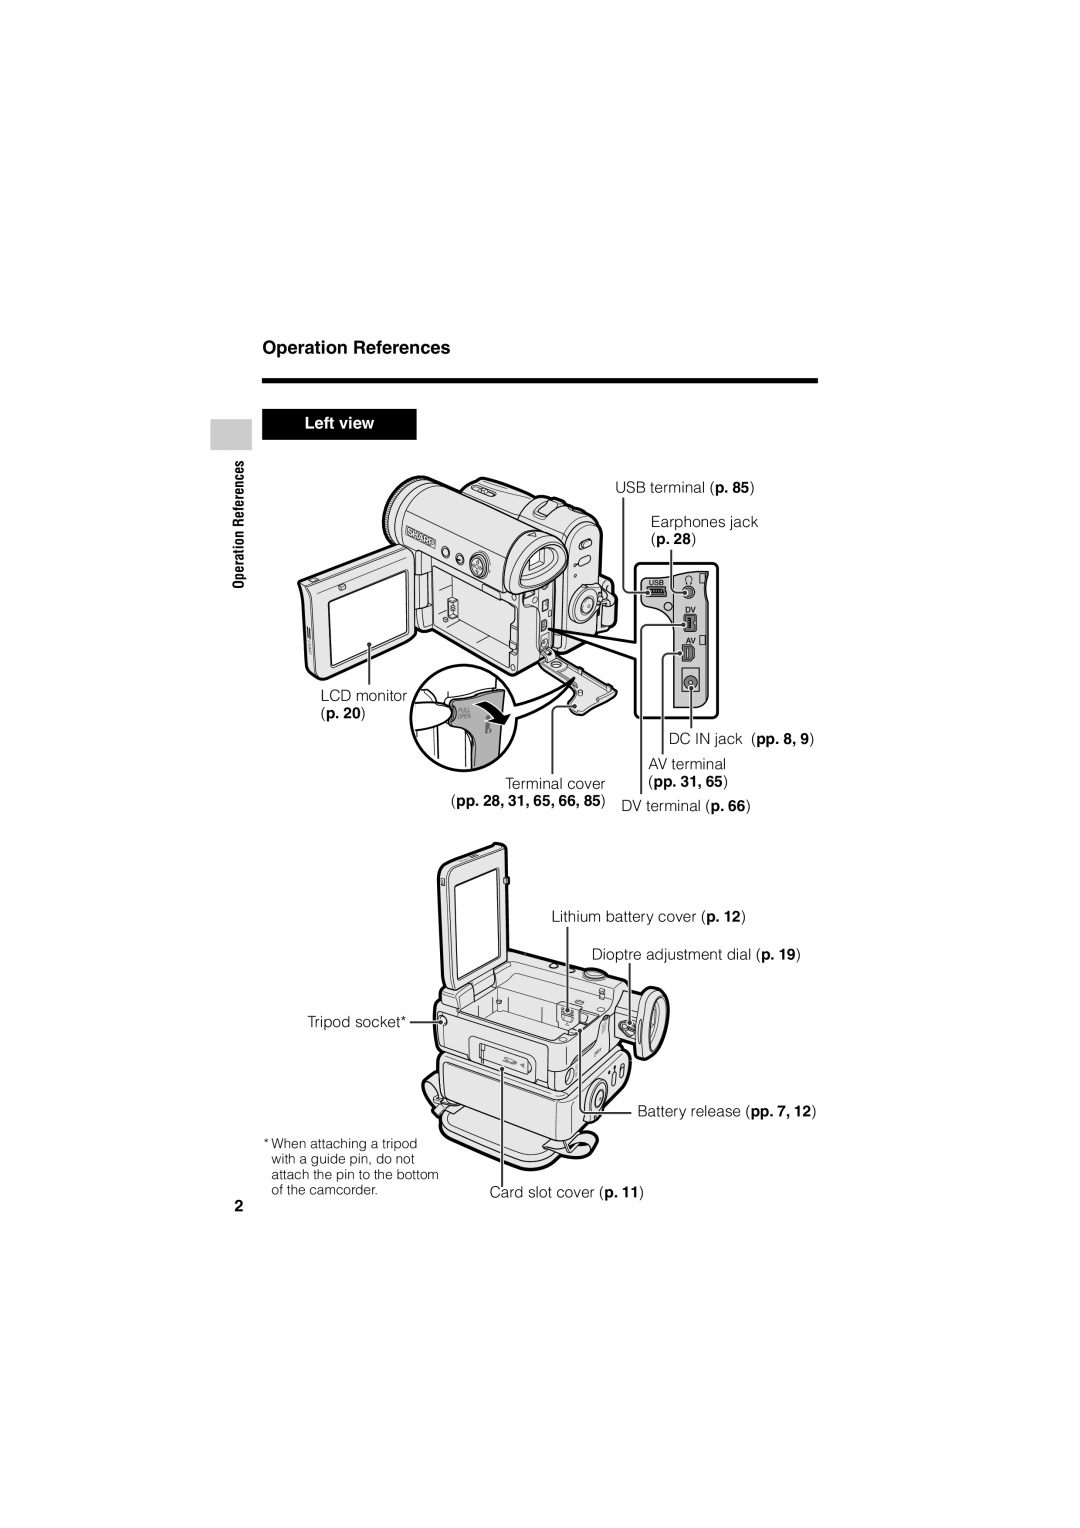 Sharp VL-Z400H-T operation manual Operation References, Left view 